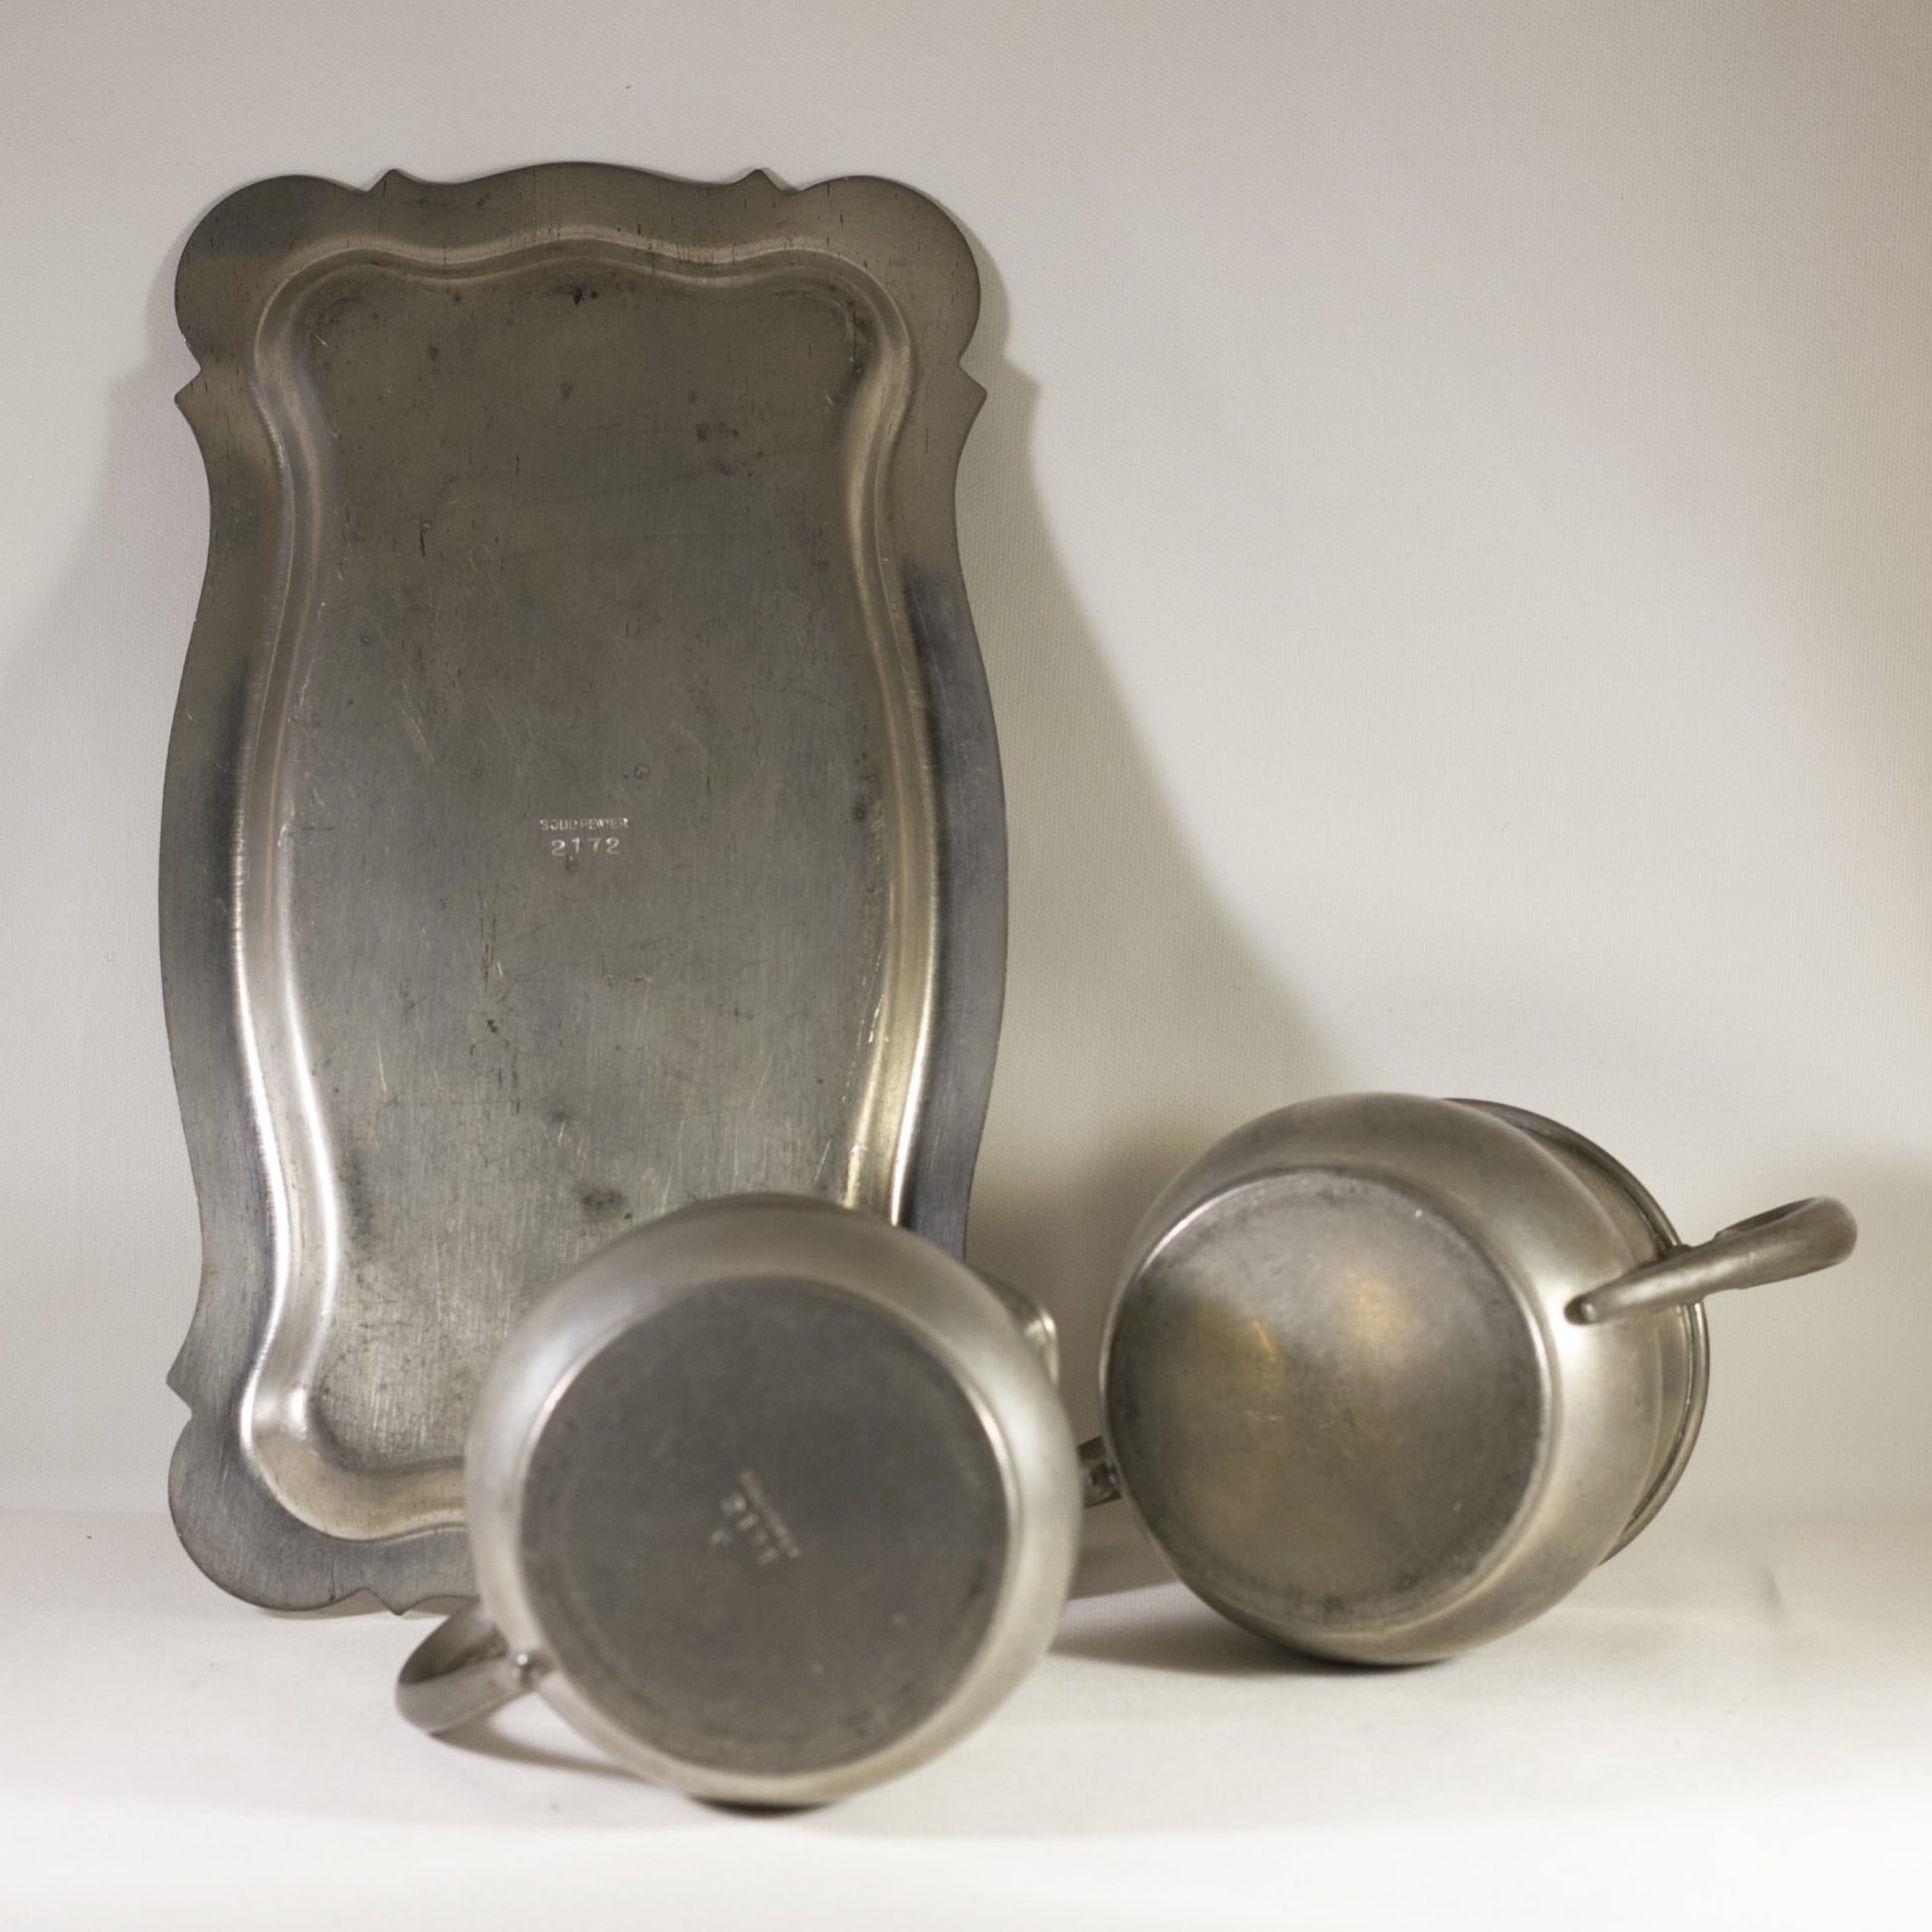 SOLID PEWTER Vintage Cream and Sugar Set with Underplate